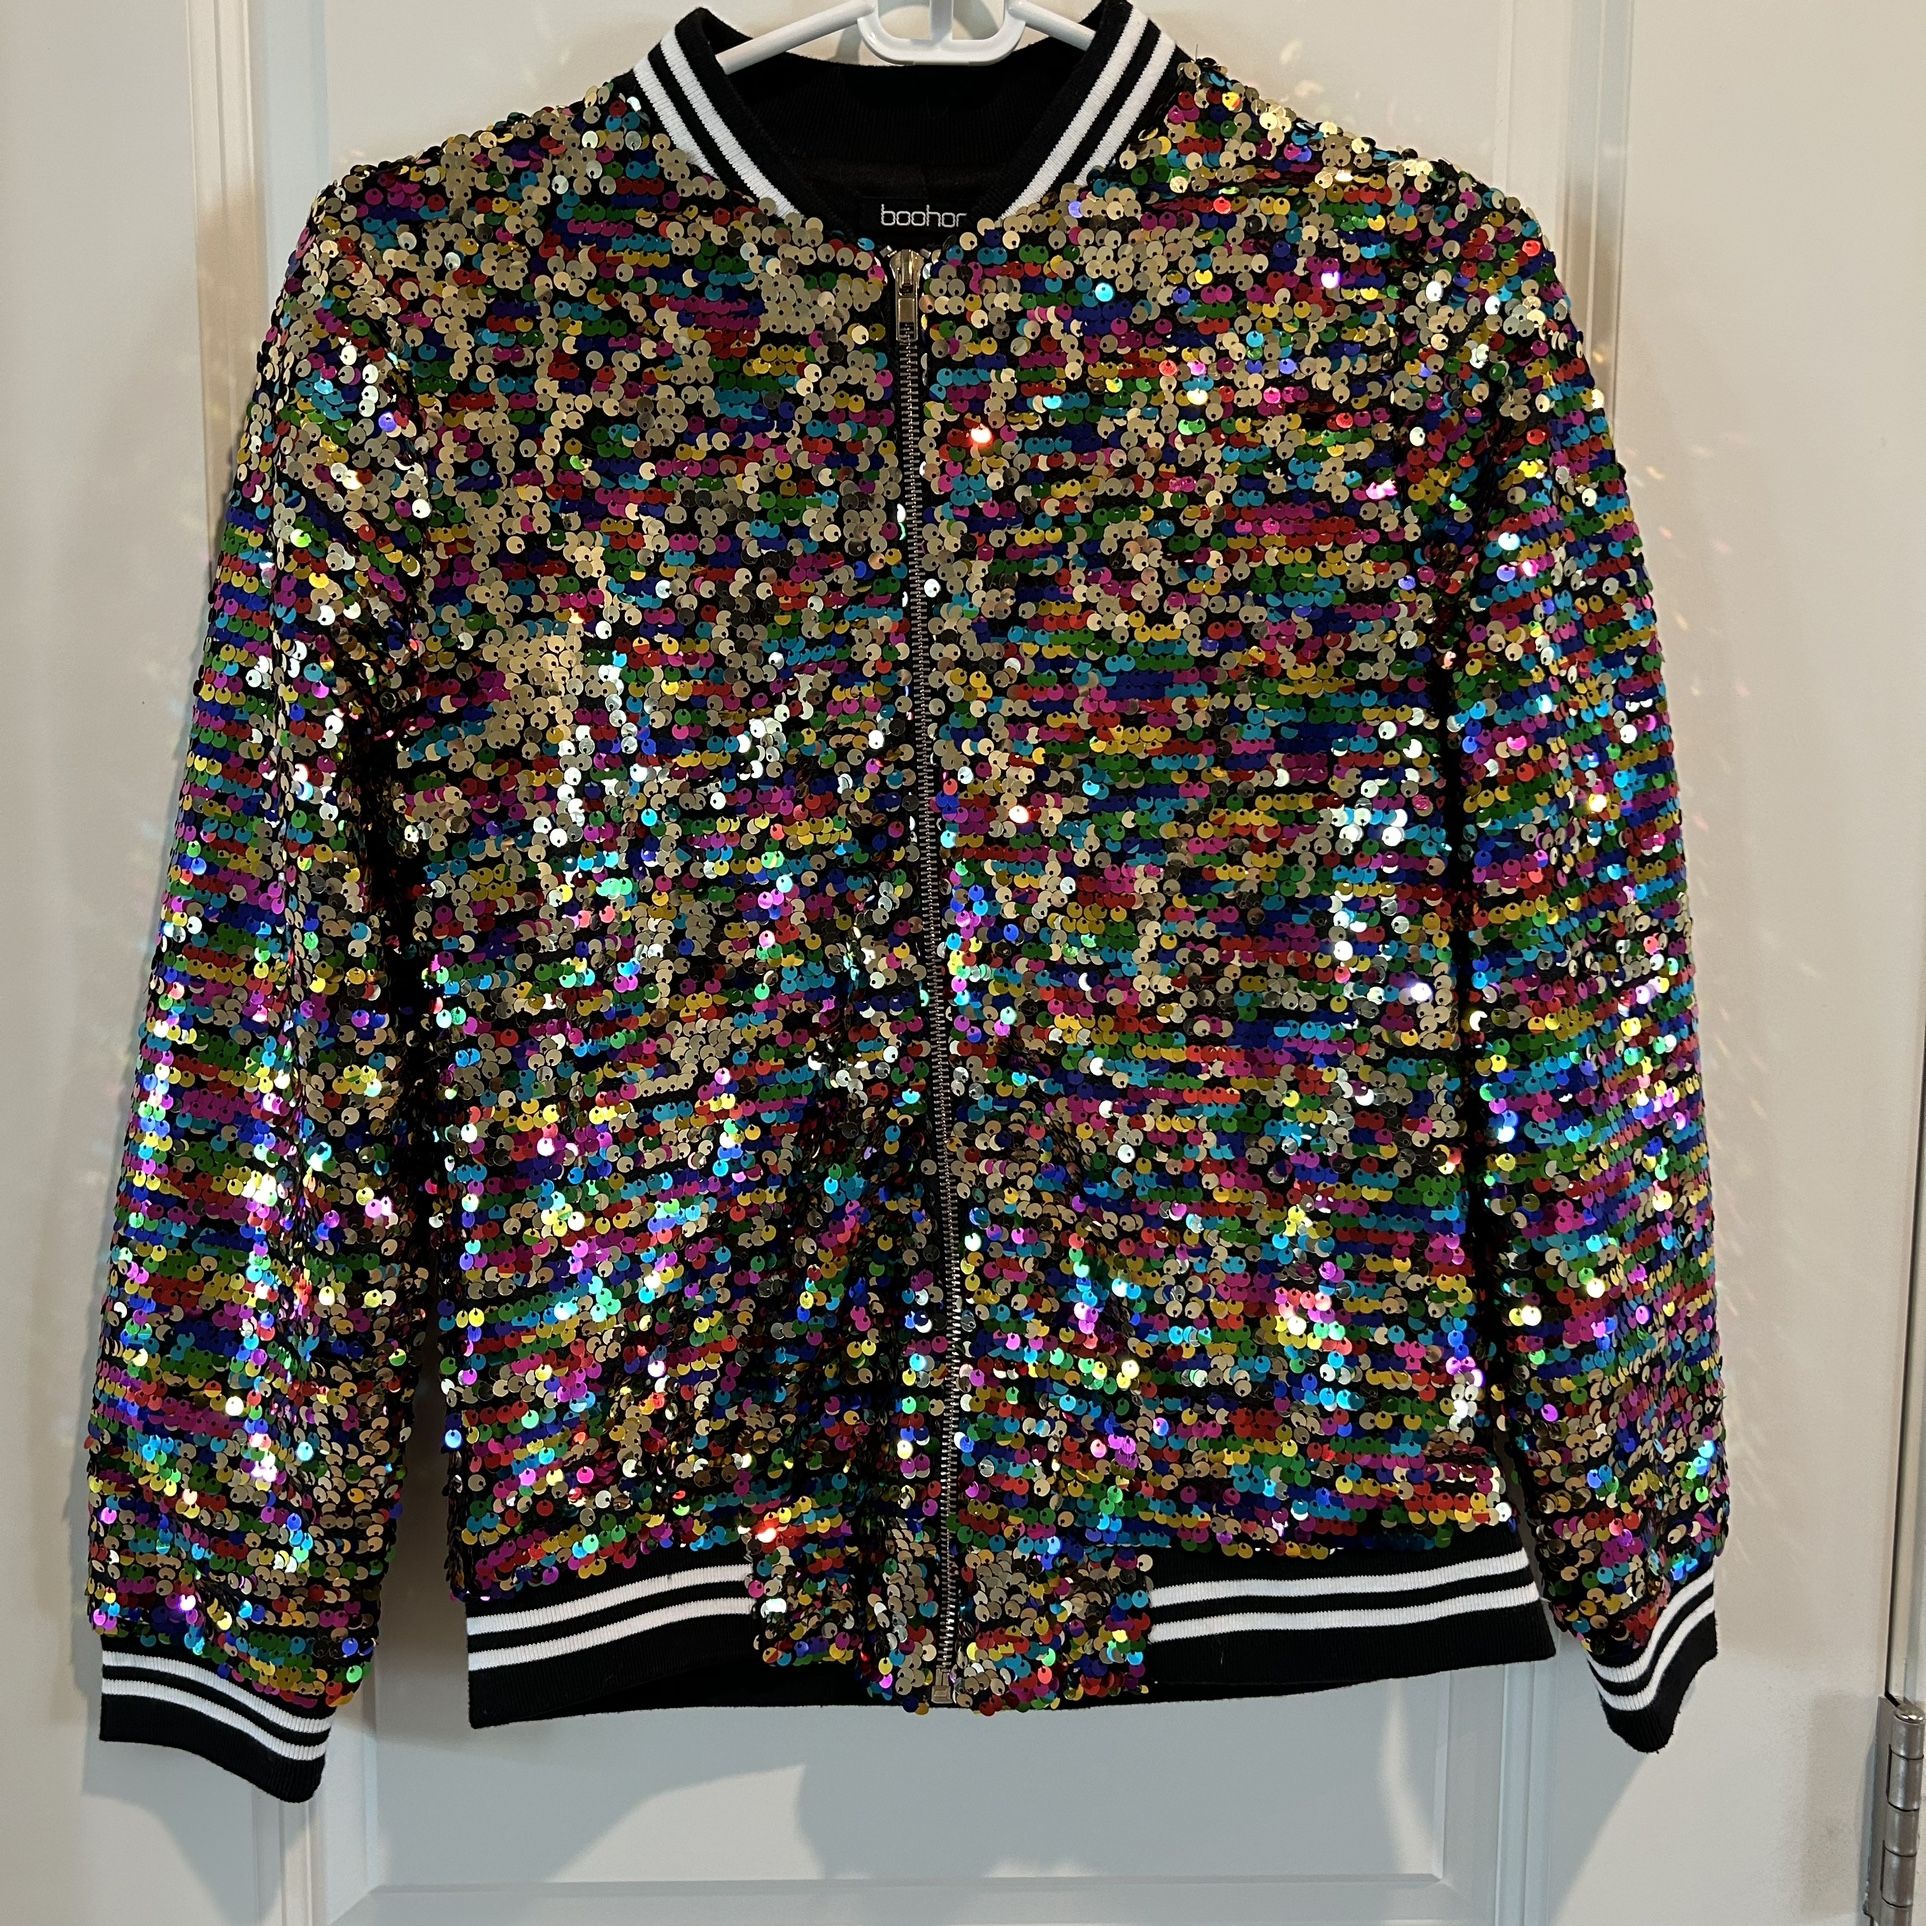 Boohoo Women Black-Gold Multi Colored Sequin Bomber Jacket  - Size 4